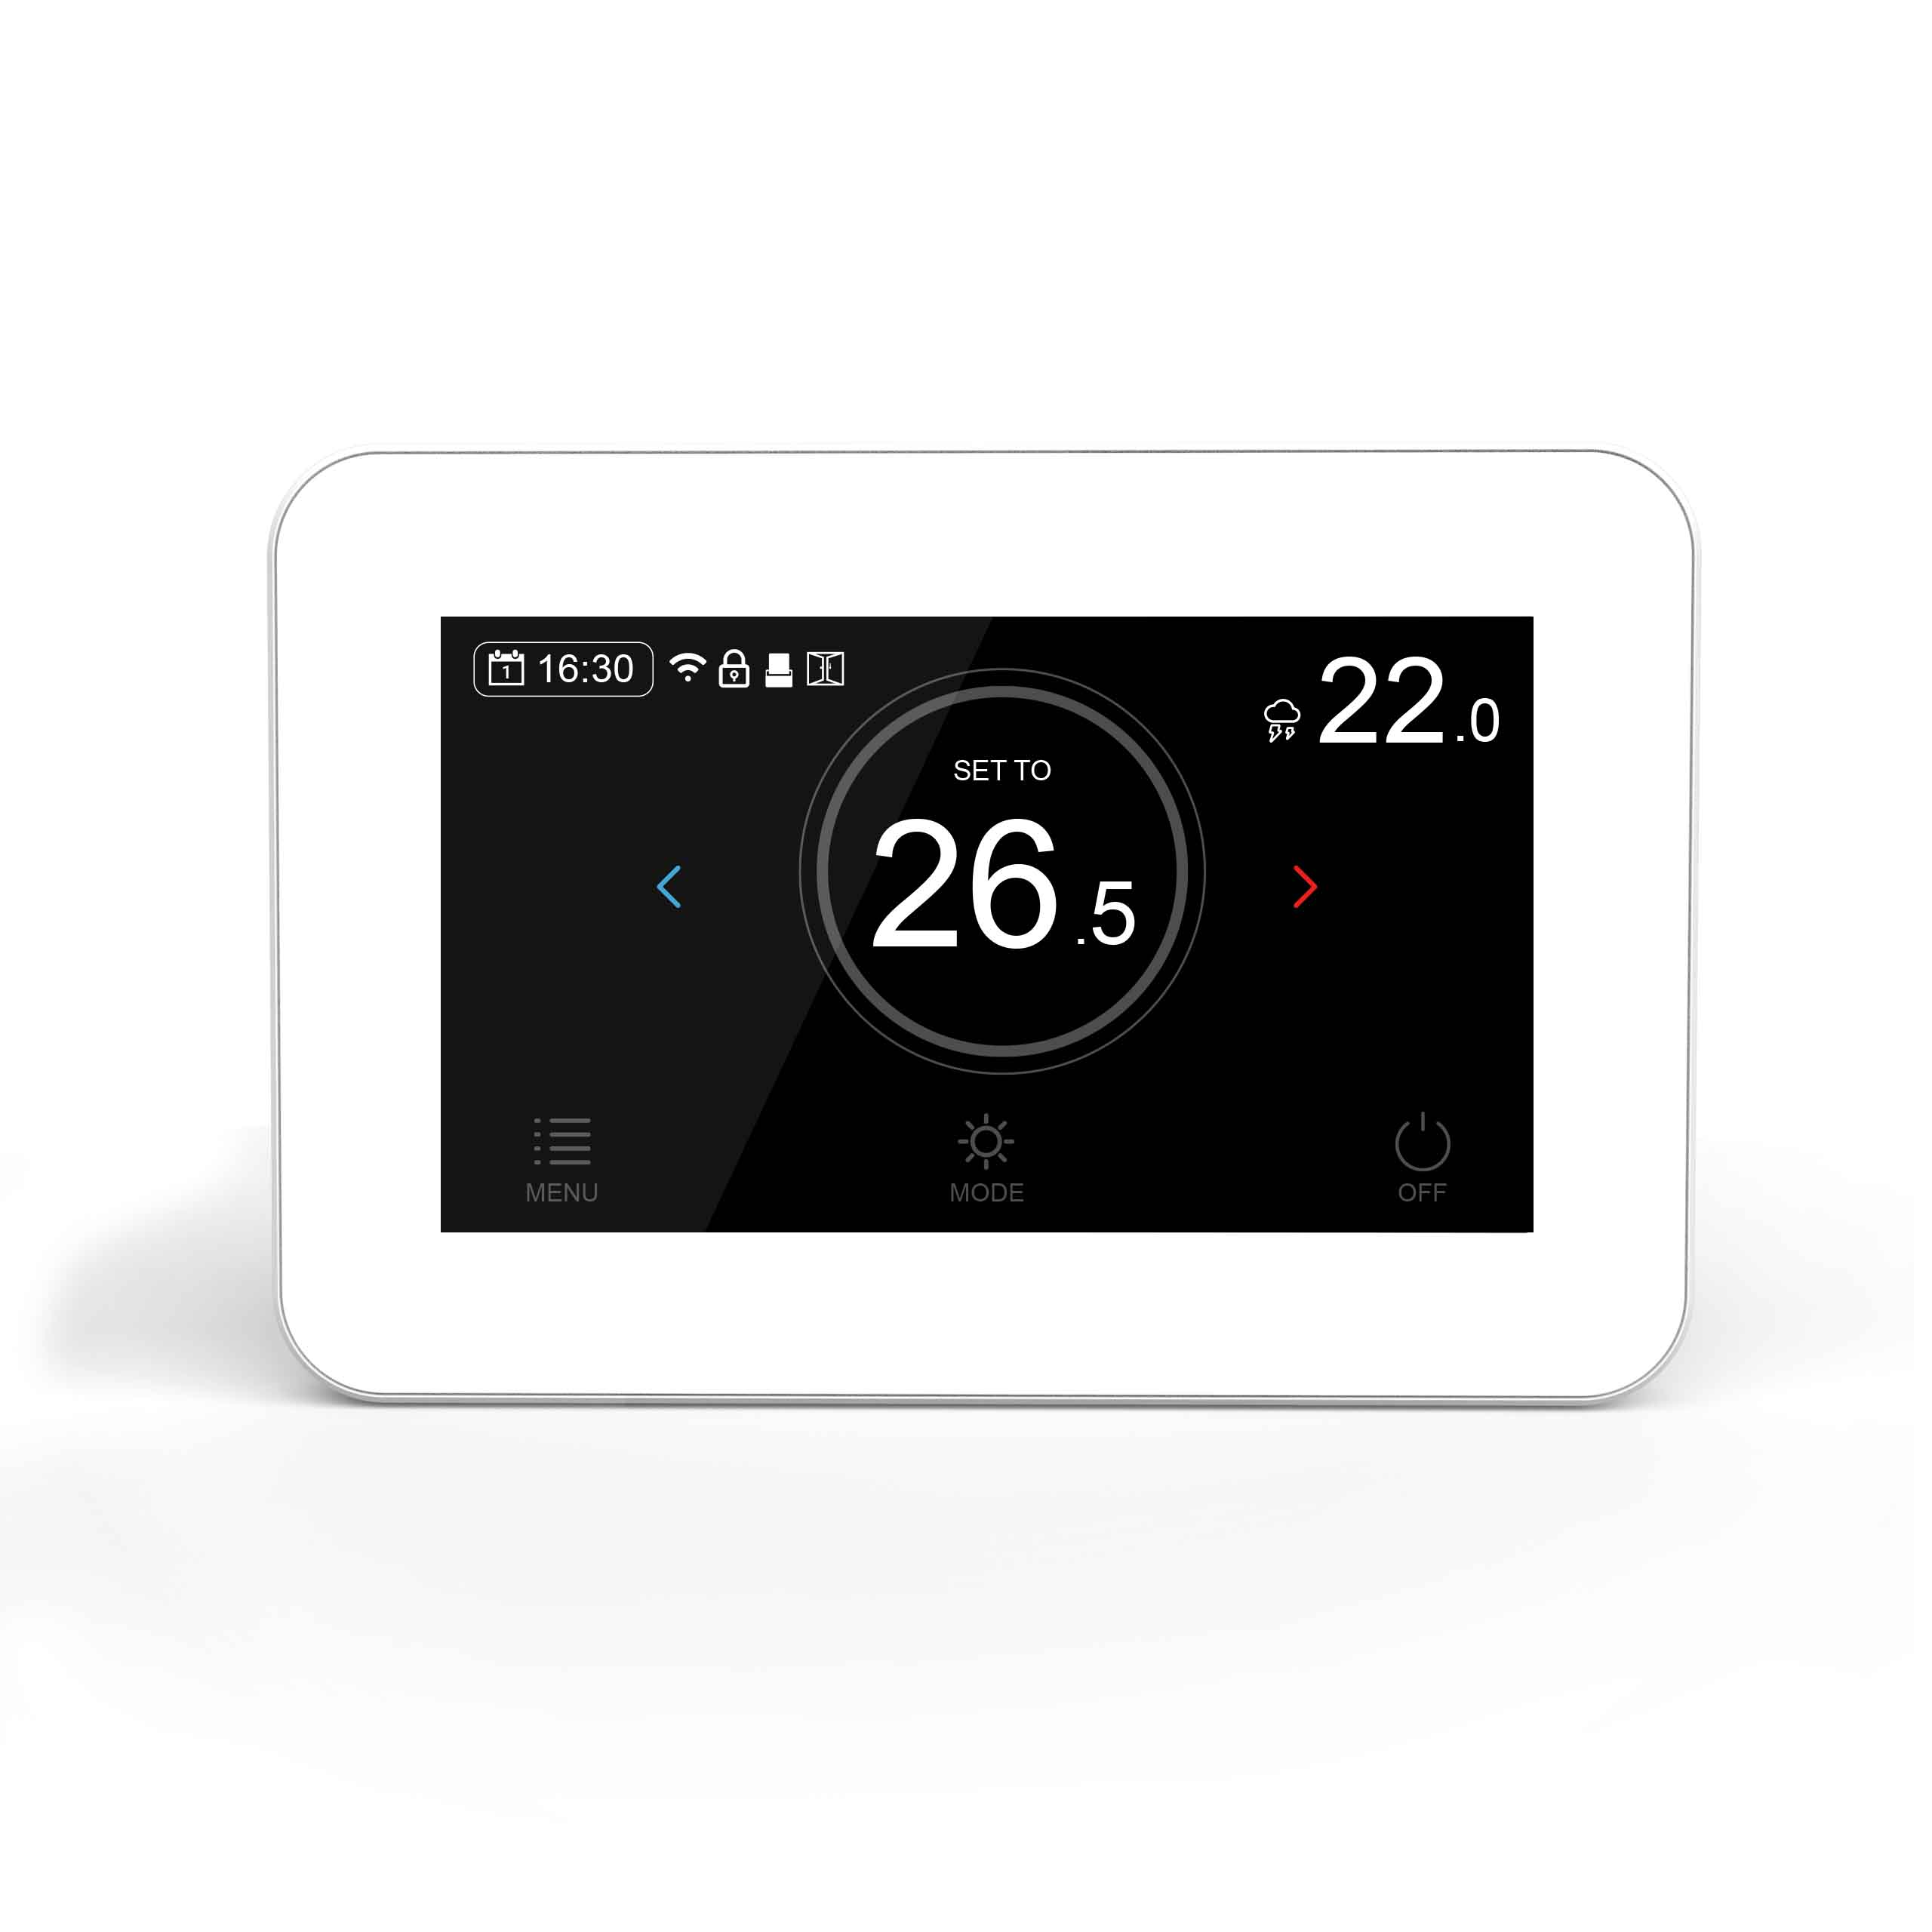 Digital Thermostat, Touch Screen Electric Programmable Heating Thermostat, Digital LCD Display Remote Control Thermostat Temperature Controller Featured Image